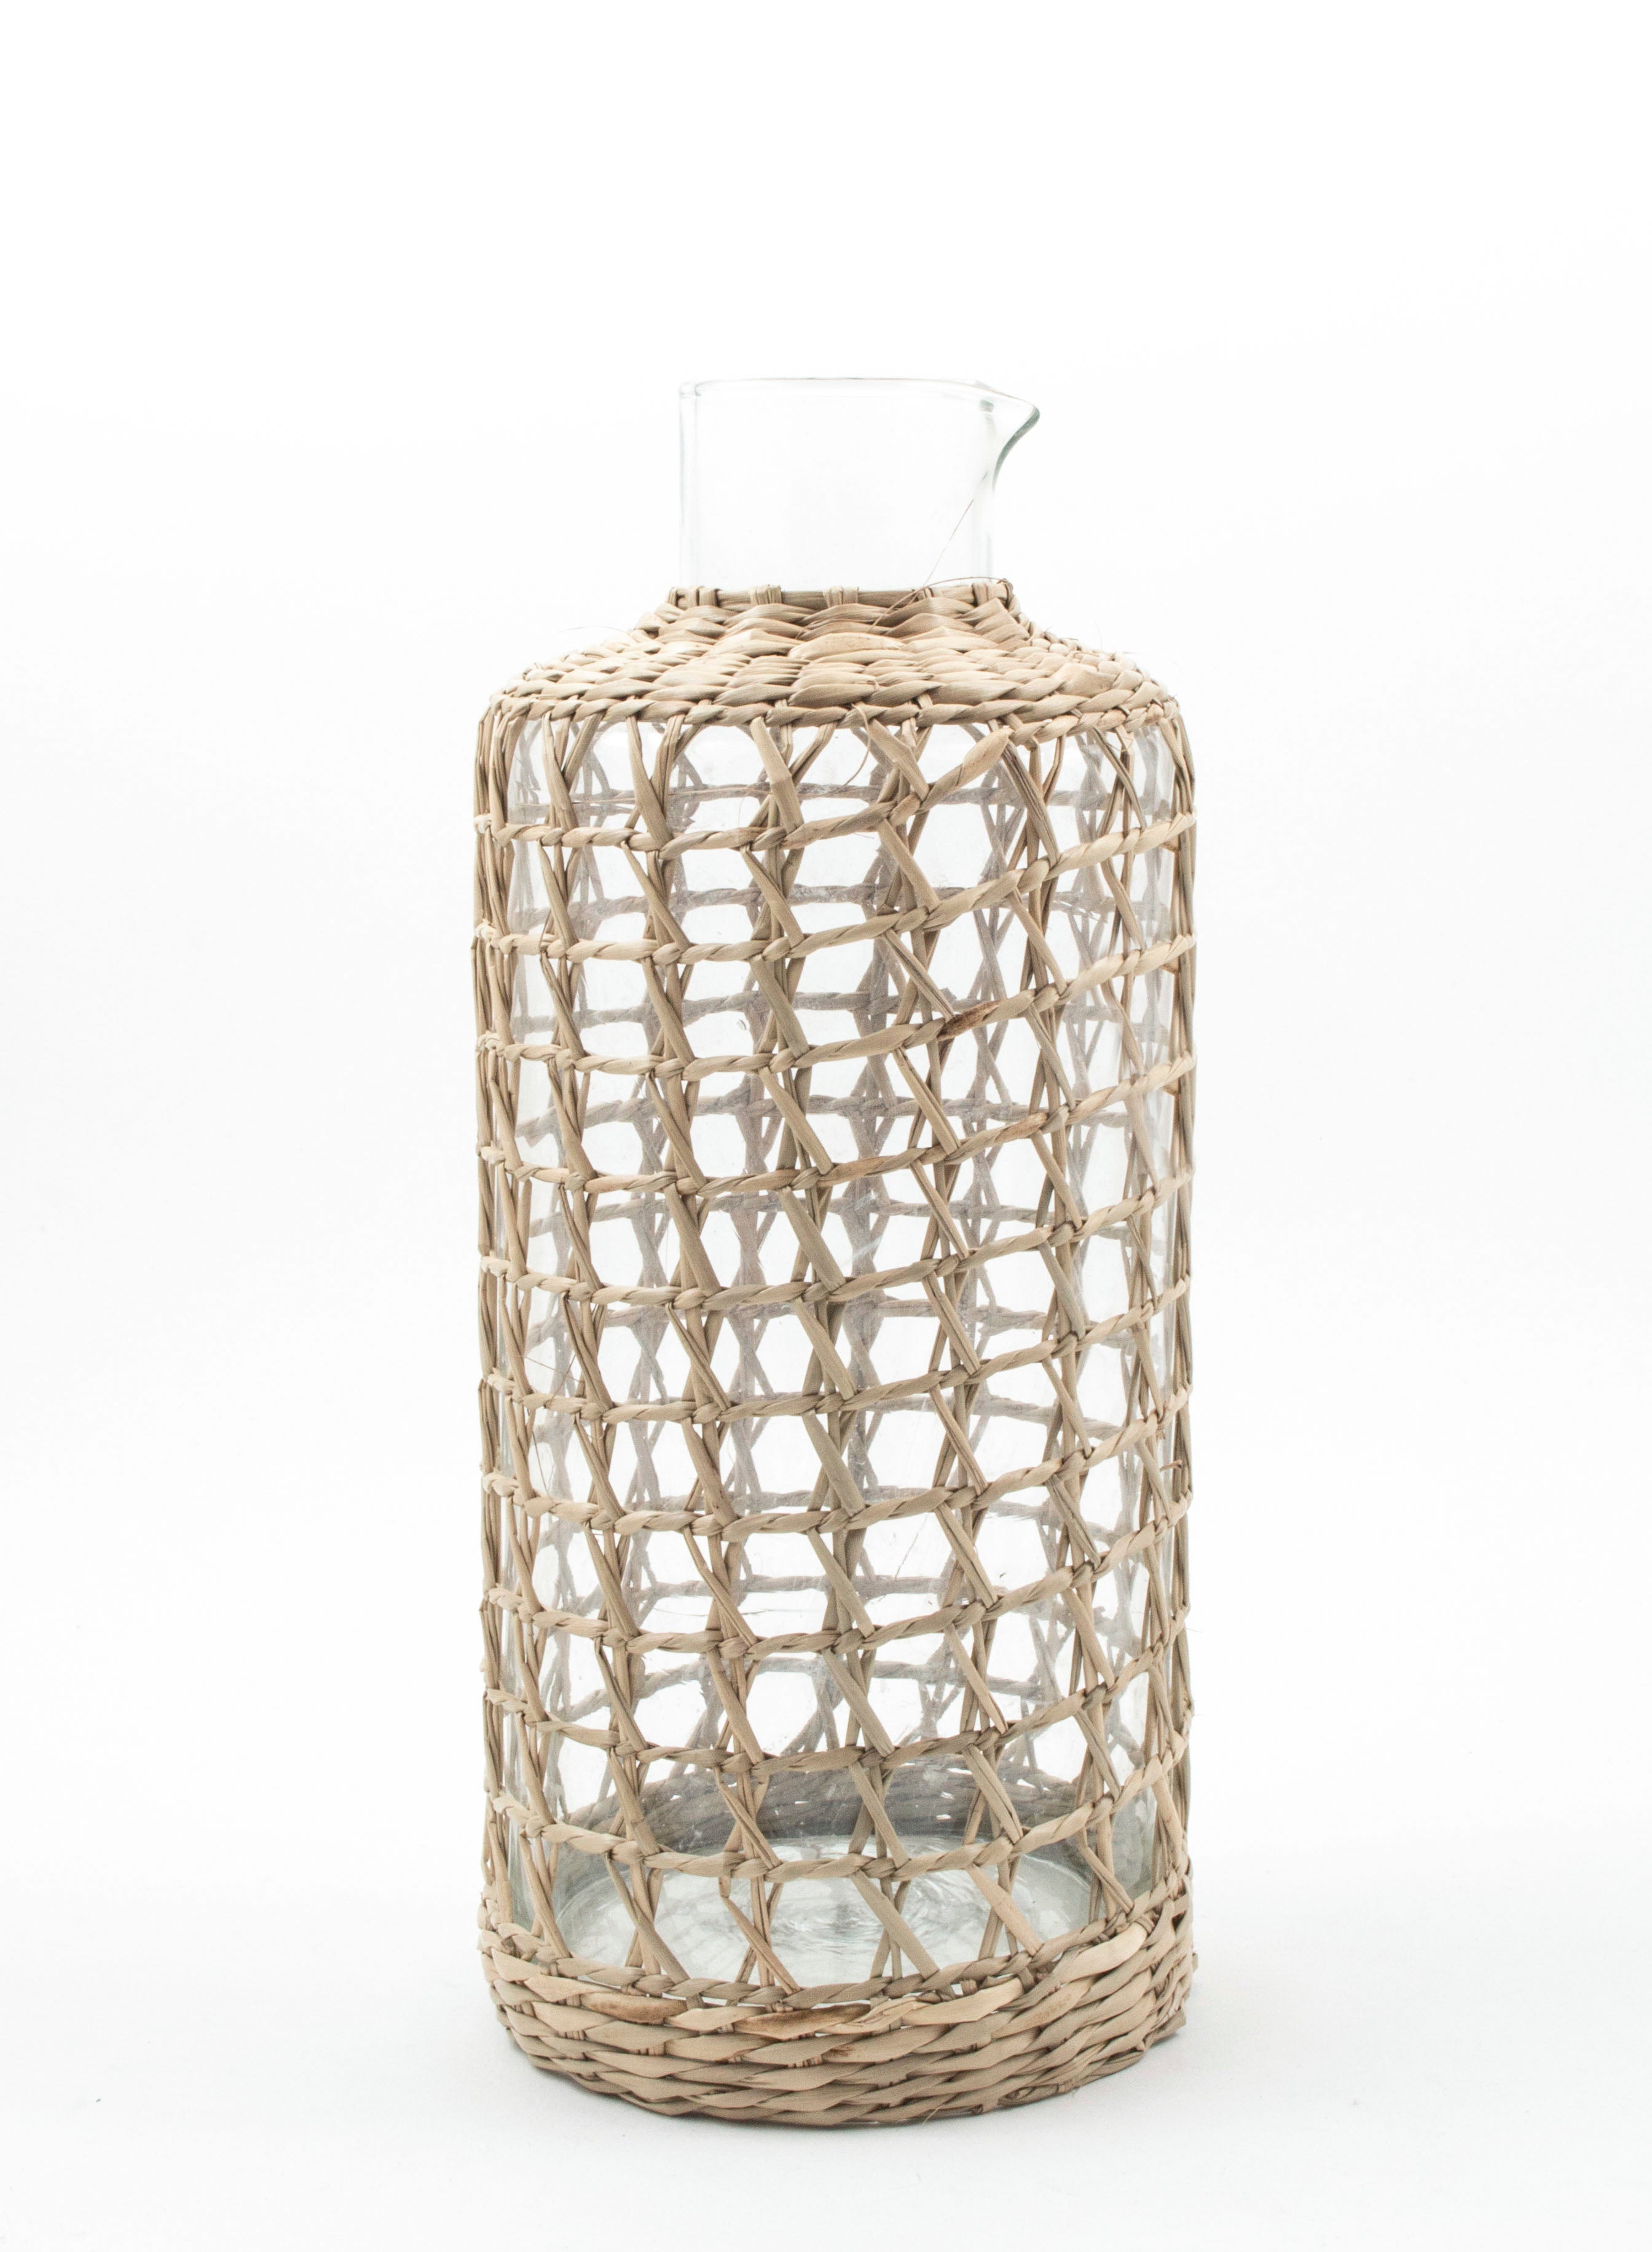 Seagrass Large Cage Carafe Glass Seagrass Brand_Seagrass & Rattan Carafes Kitchen_Drinkware Serving Pieces large_cage_carafe_B